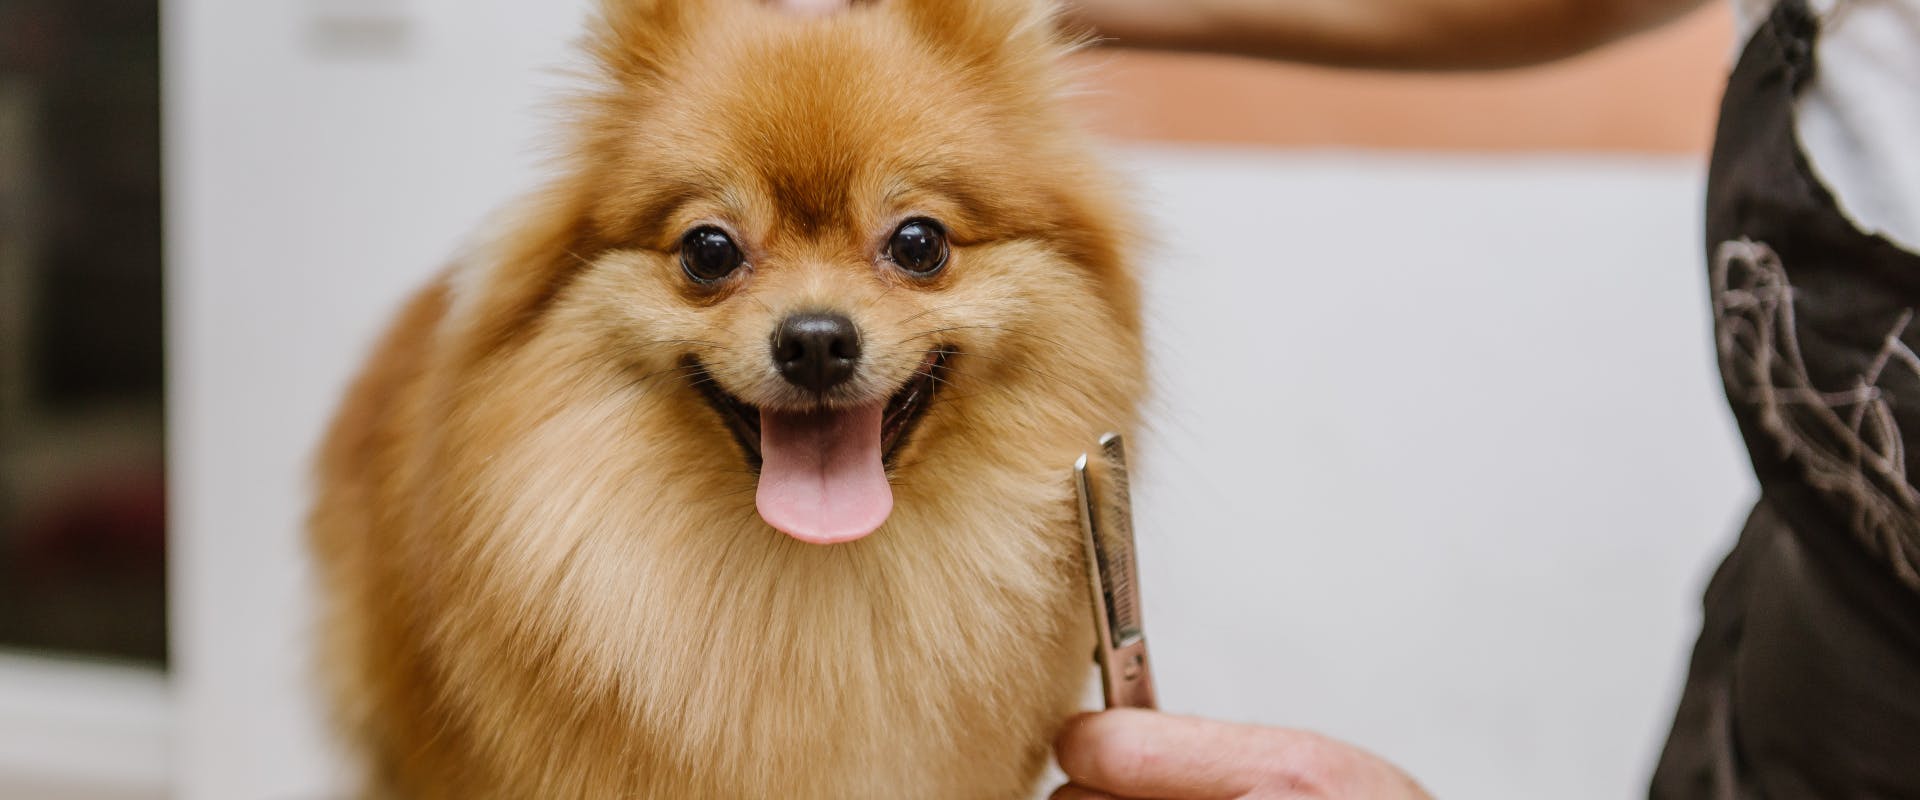 pomeranian being groomed with a metal comb